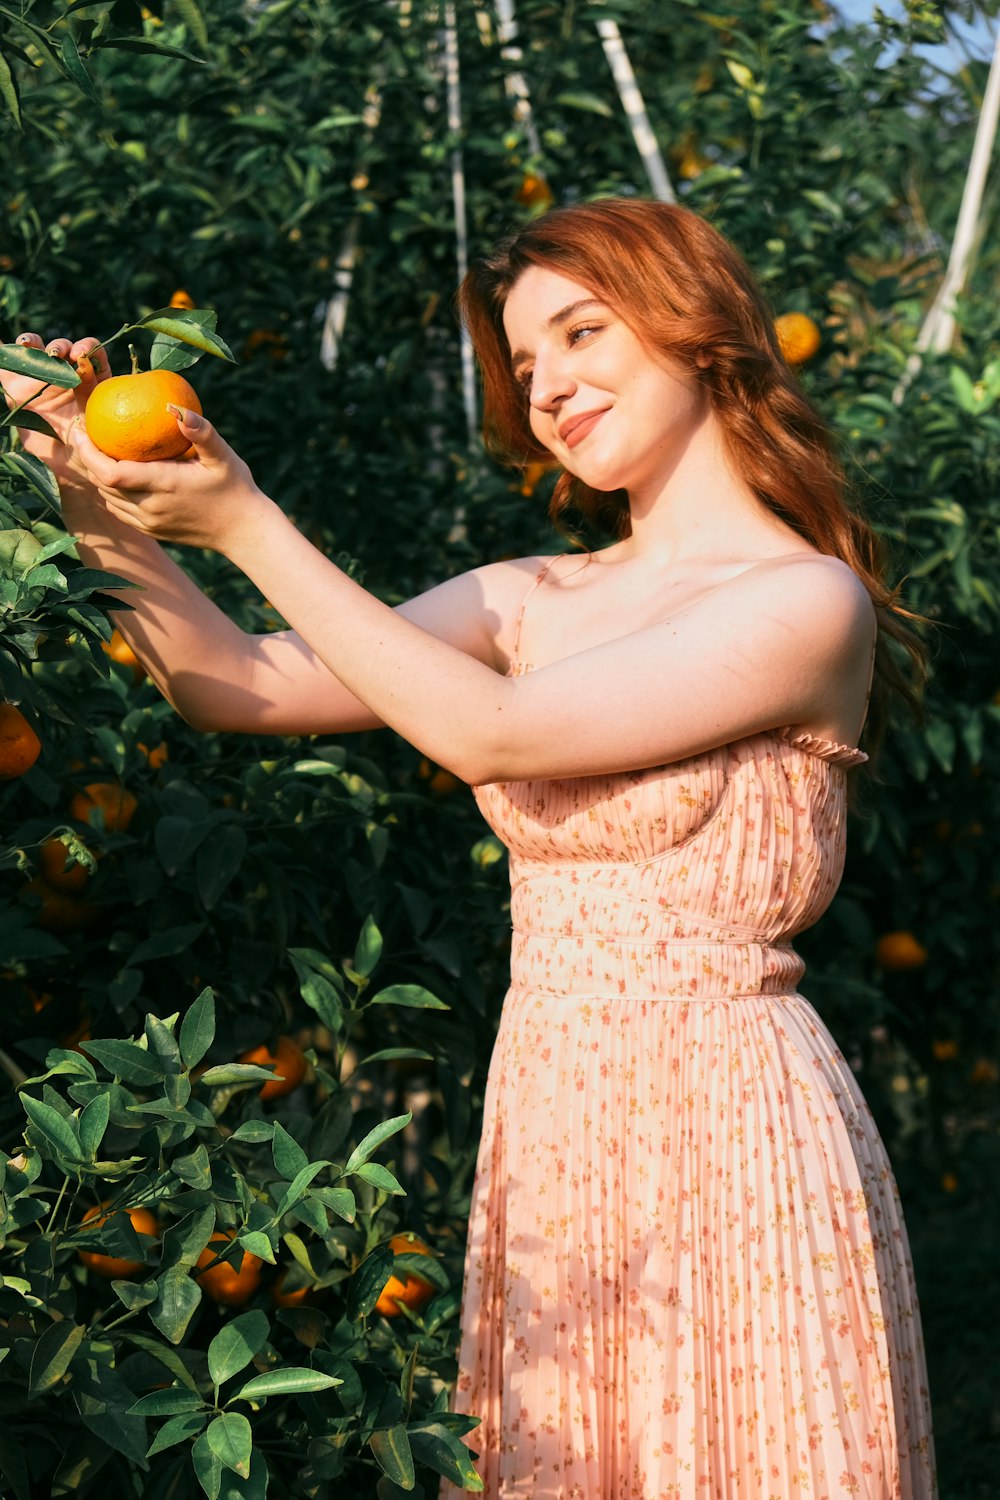 a person holding an orange